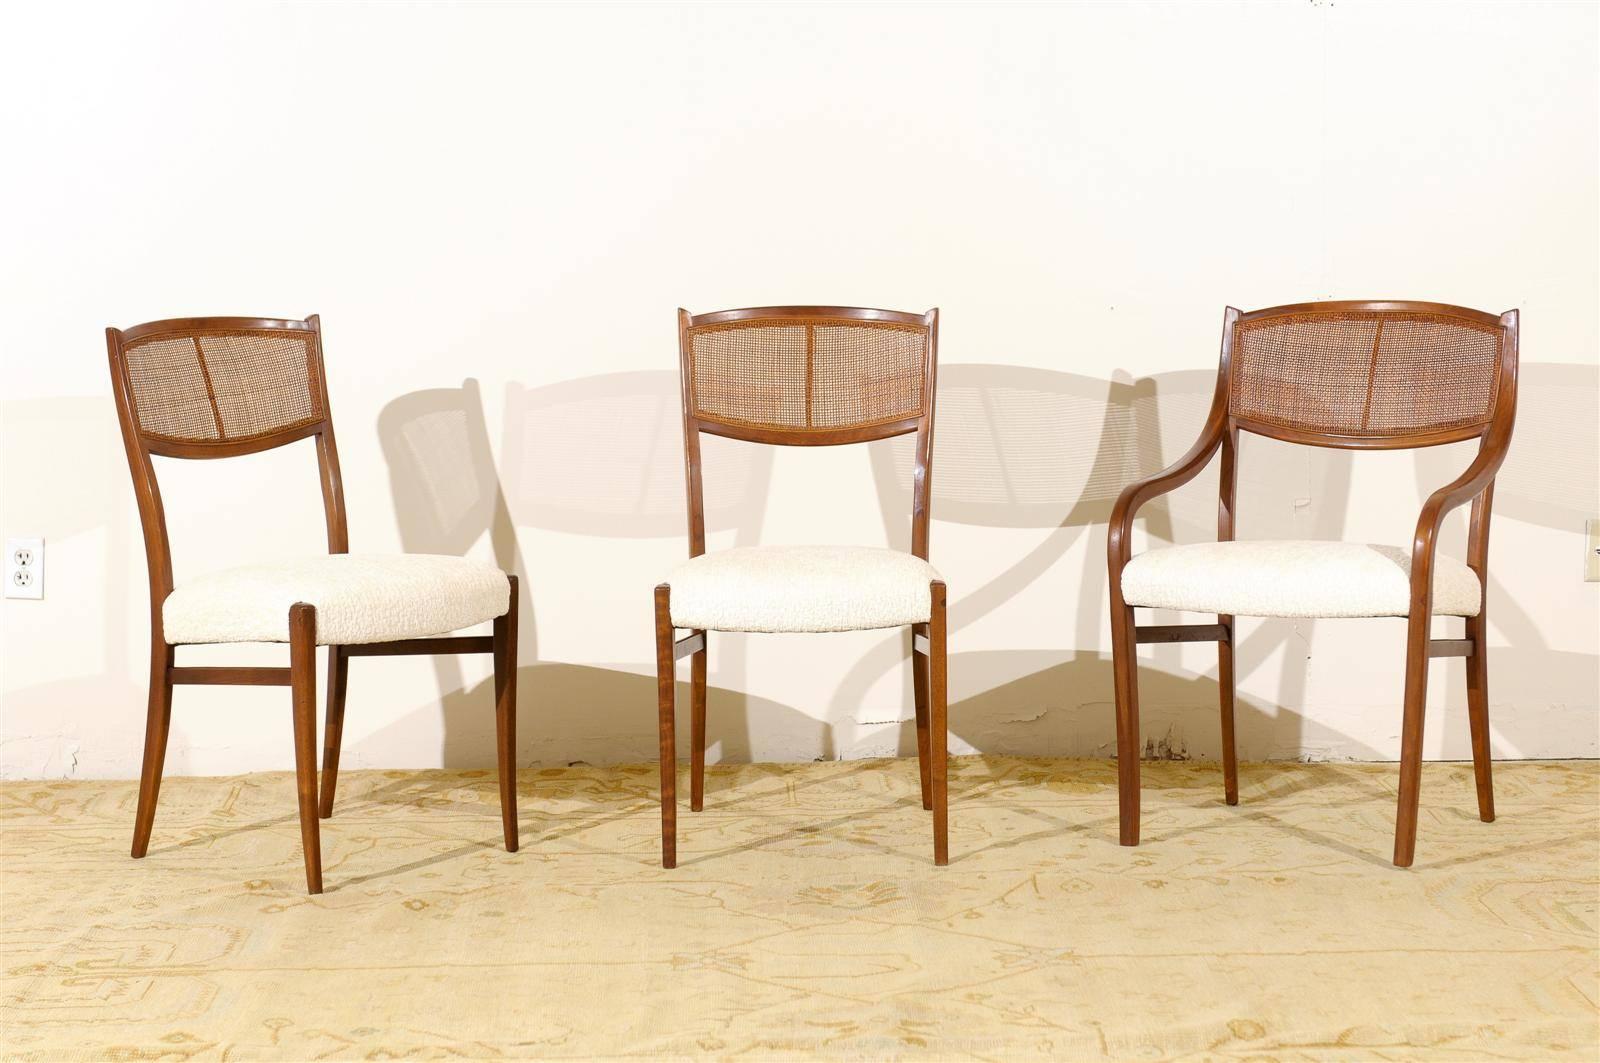 An exquisite set of ten (10) rare dining chairs by Barney Flagg, circa 1960. Single surviving examples from this series are nearly impossible to locate; a set of this size is the Collector's equivalent of capturing a Unicorn.  Expertly crafted